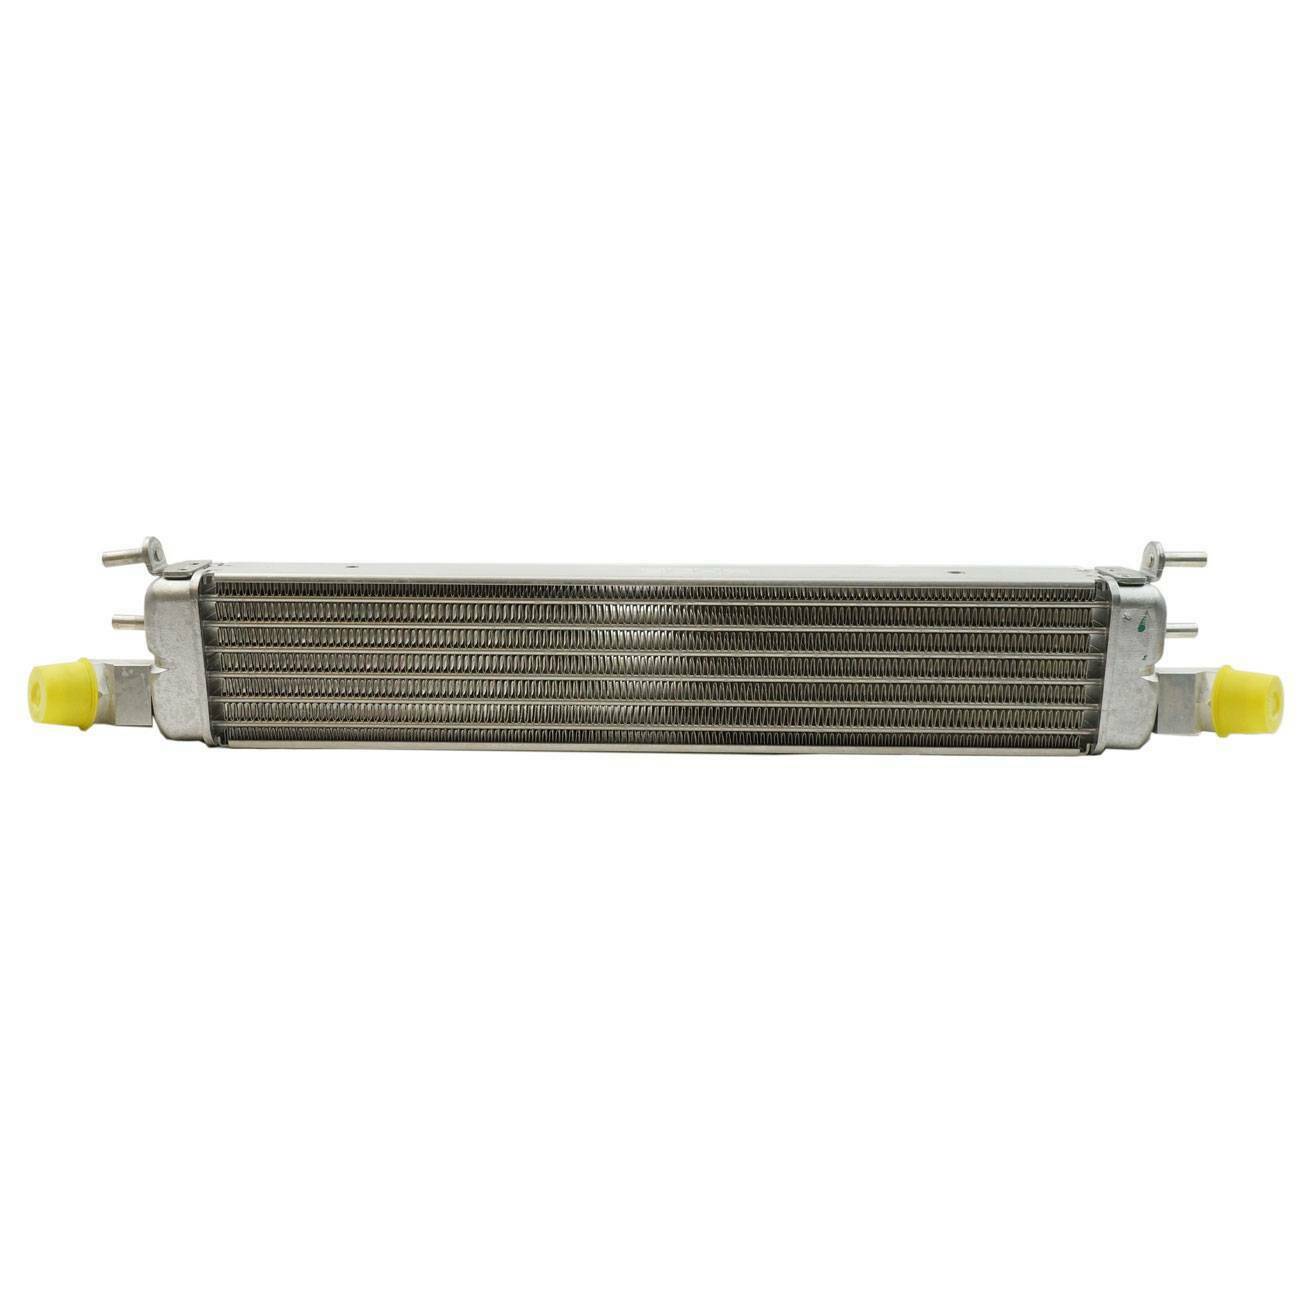 Transmission Oil Cooler for Mercedes S-Class W220 W209 S600 CL600 A2205000400 German Made